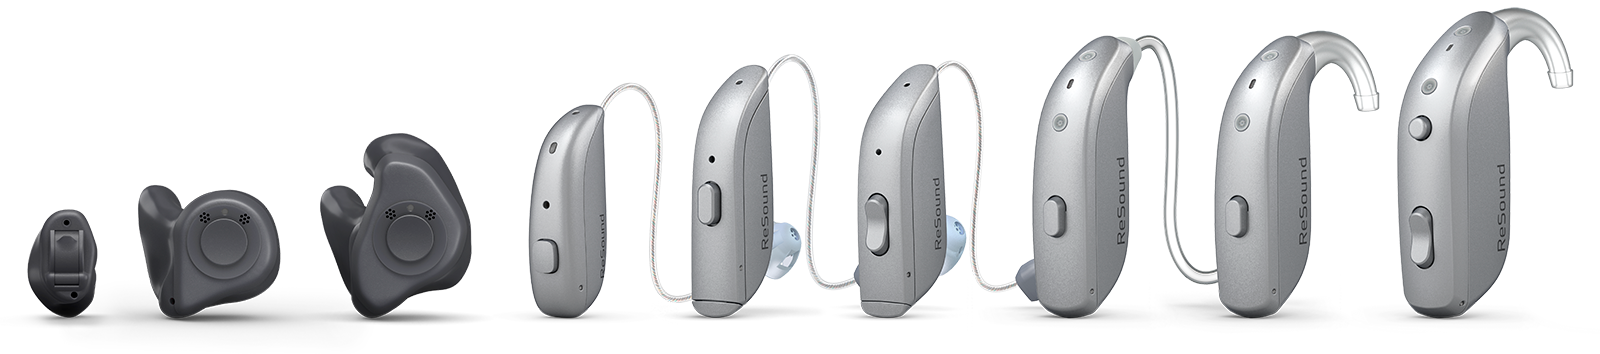 The resound Nexia Hearing Aids range available at Pinnacle Hearing Care in Ireland